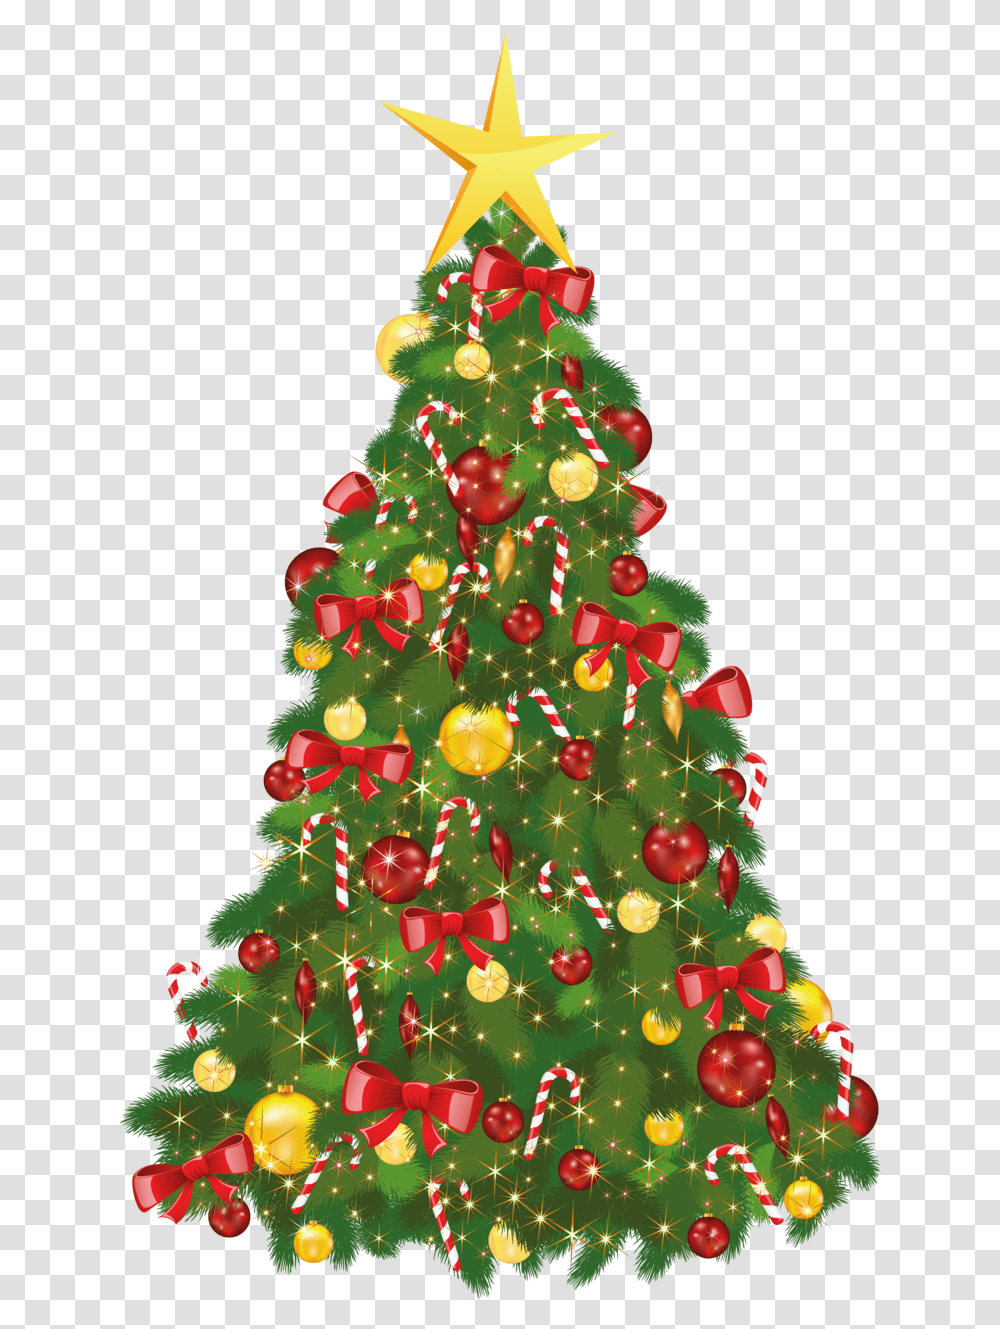 Christmas Tree Download Merry Christmas Tree, Ornament, Plant, Star Symbol Transparent Png